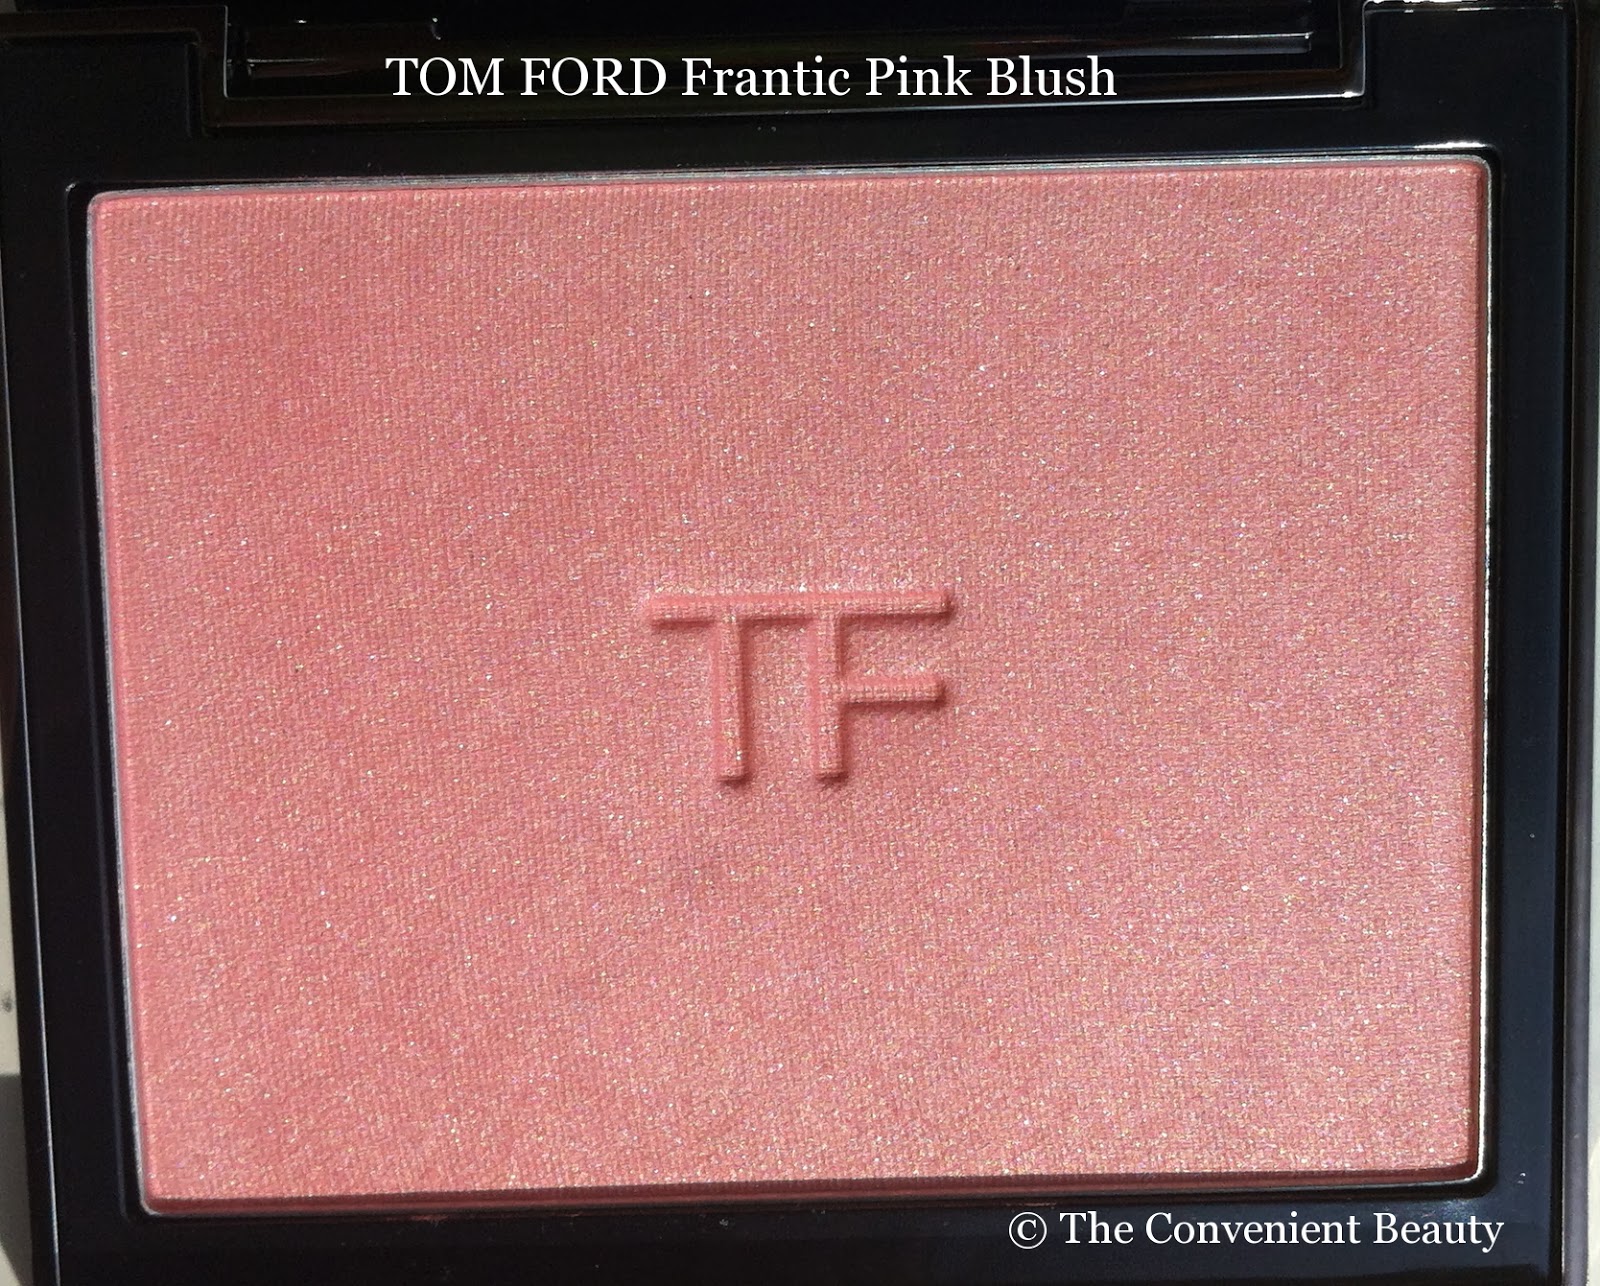 The Convenient Beauty: Review: Ford Color 02 Frantic Pink